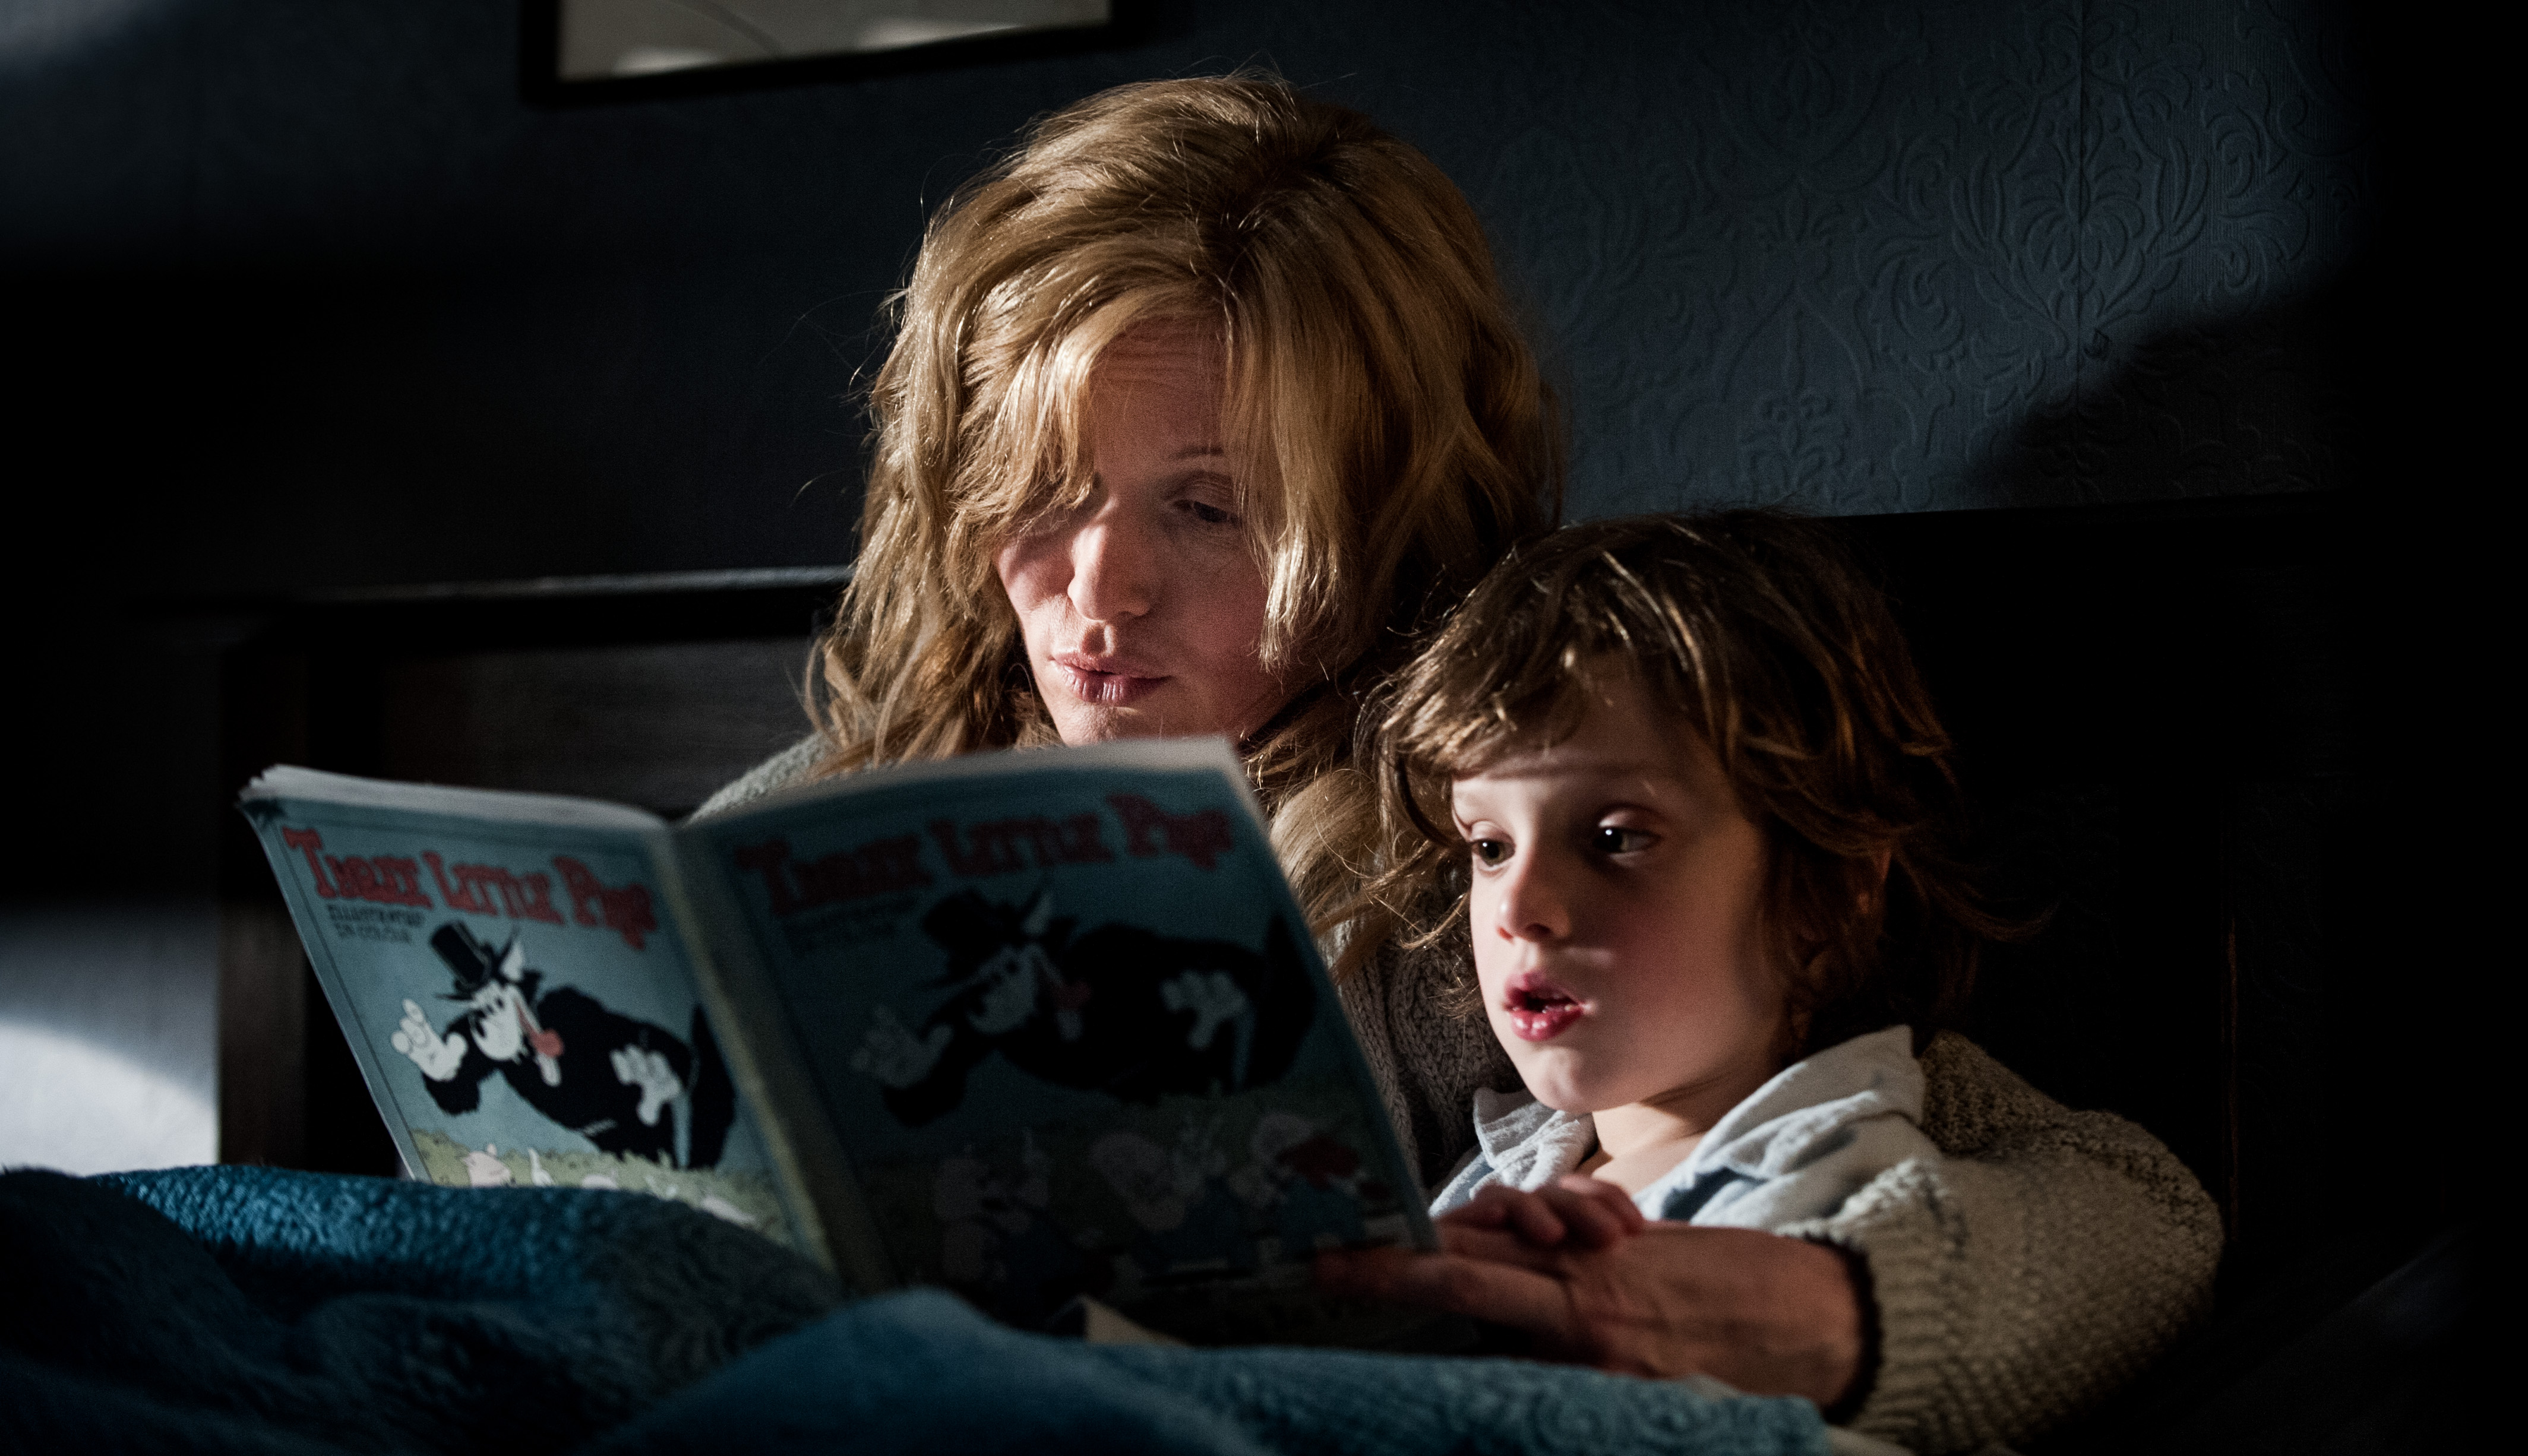 Mother and son (Davis and Wiseman) read before bedtime.